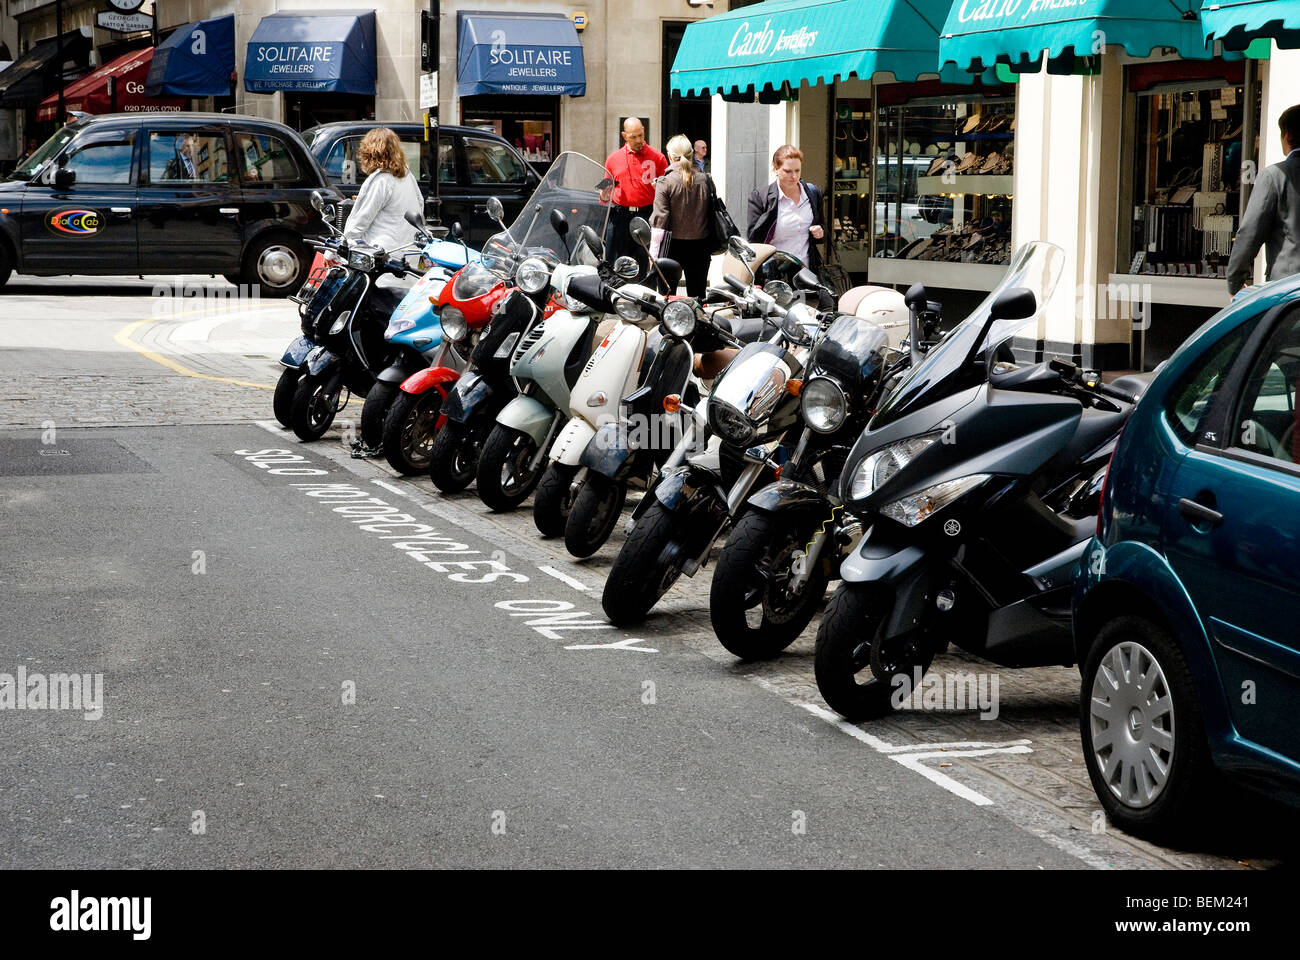 Motorcycles parked in a bay in street in Hatton Garden Stock Photo